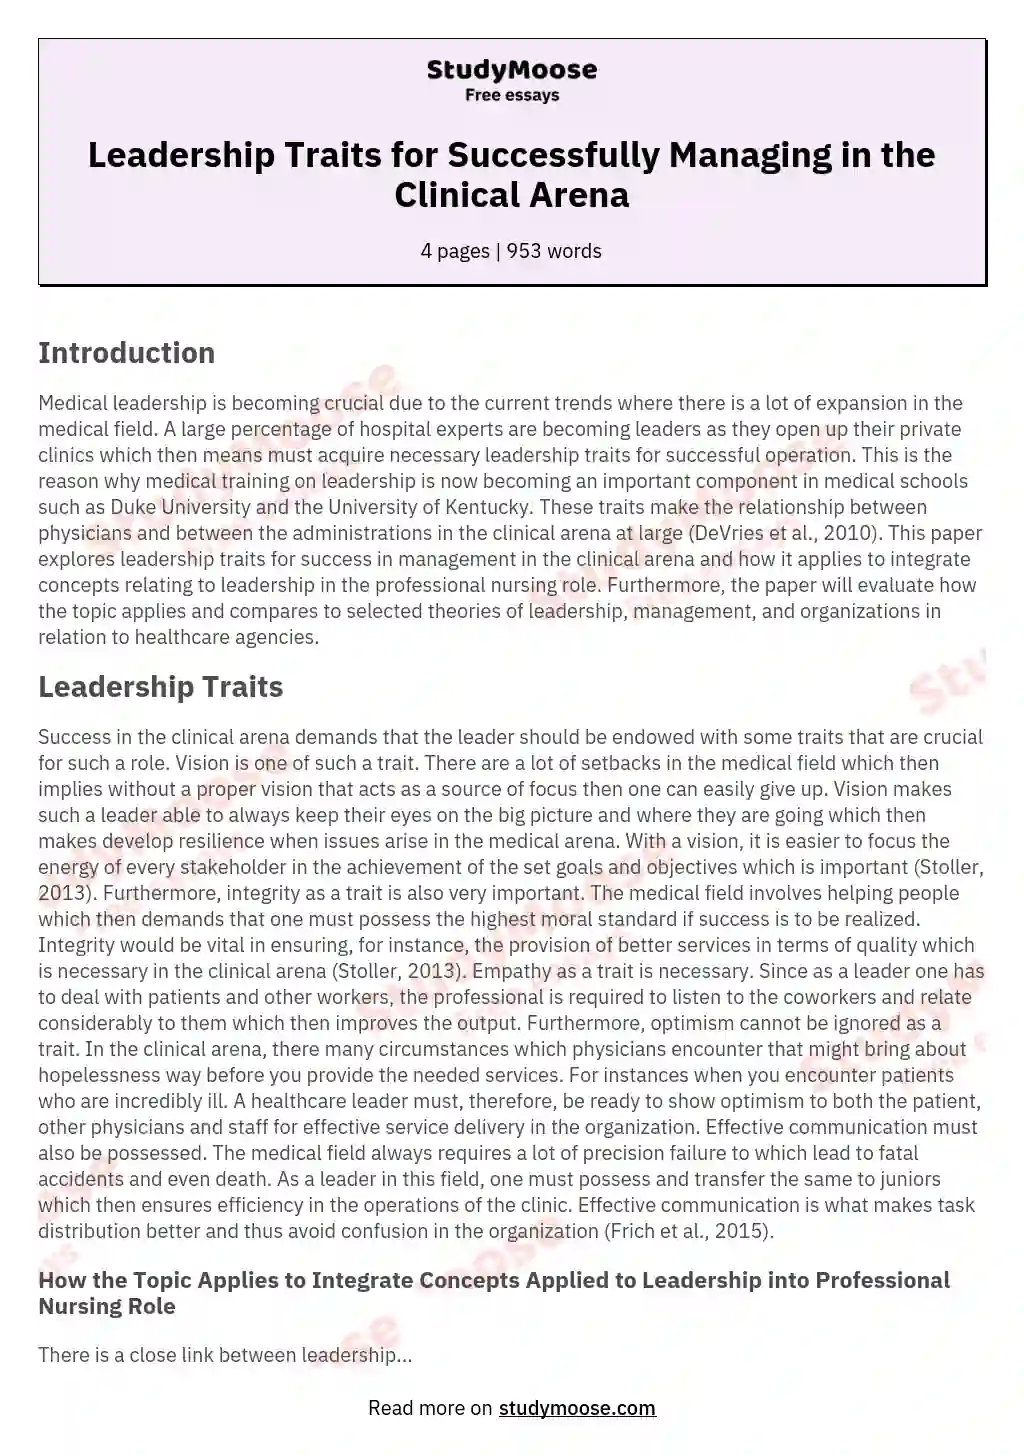 Leadership Traits for Successfully Managing in the Clinical Arena essay